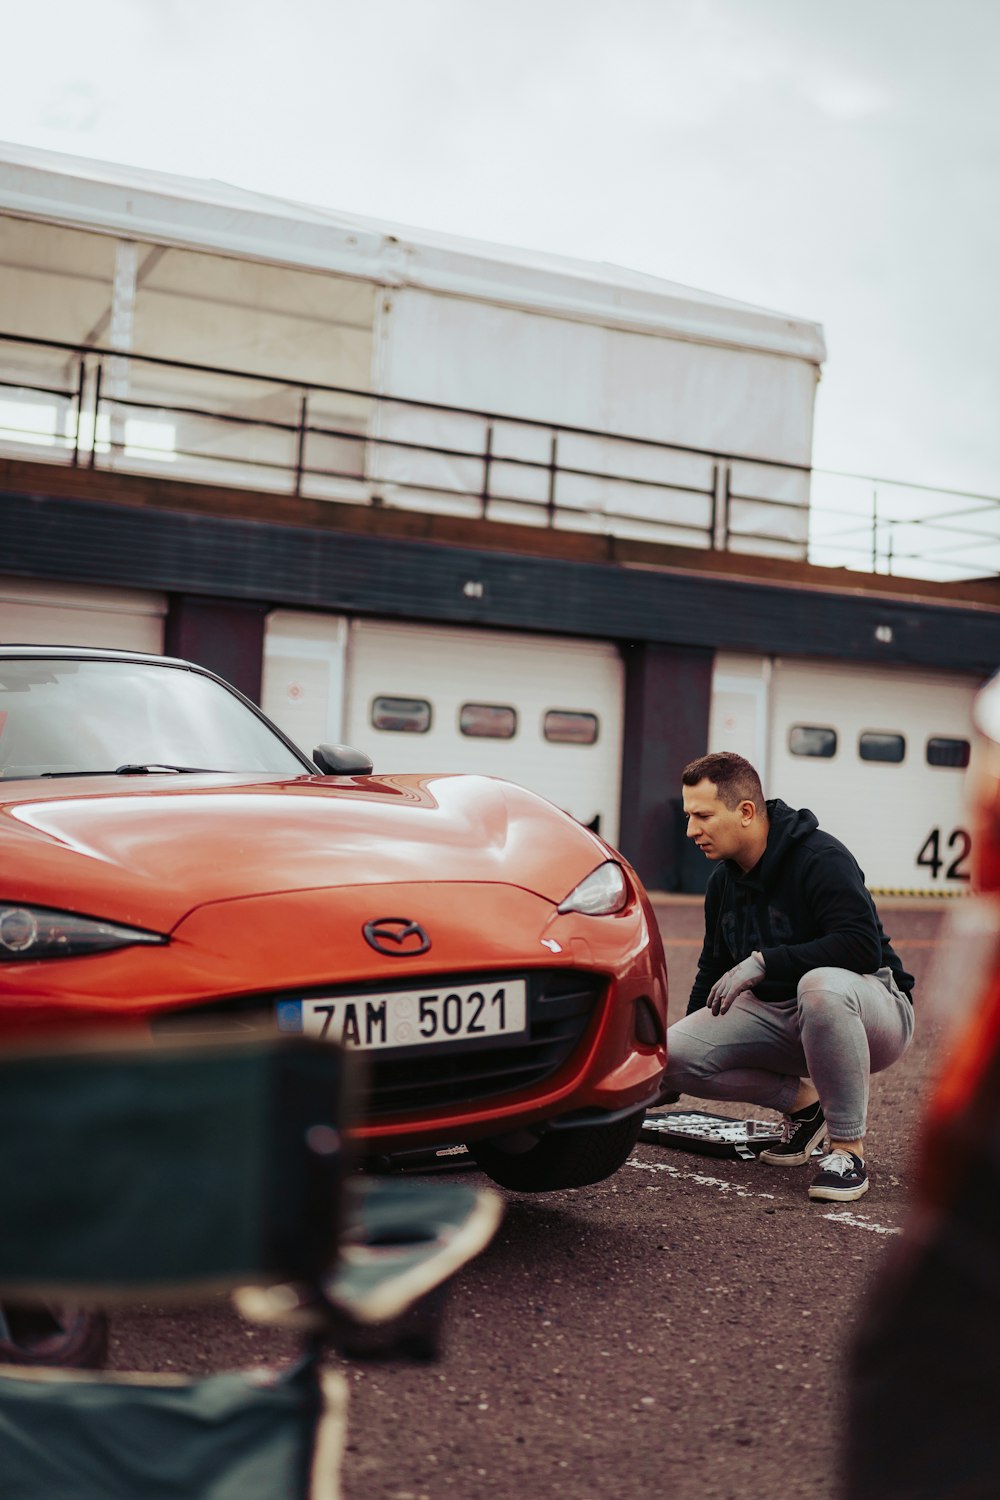 a man kneeling down next to a red sports car